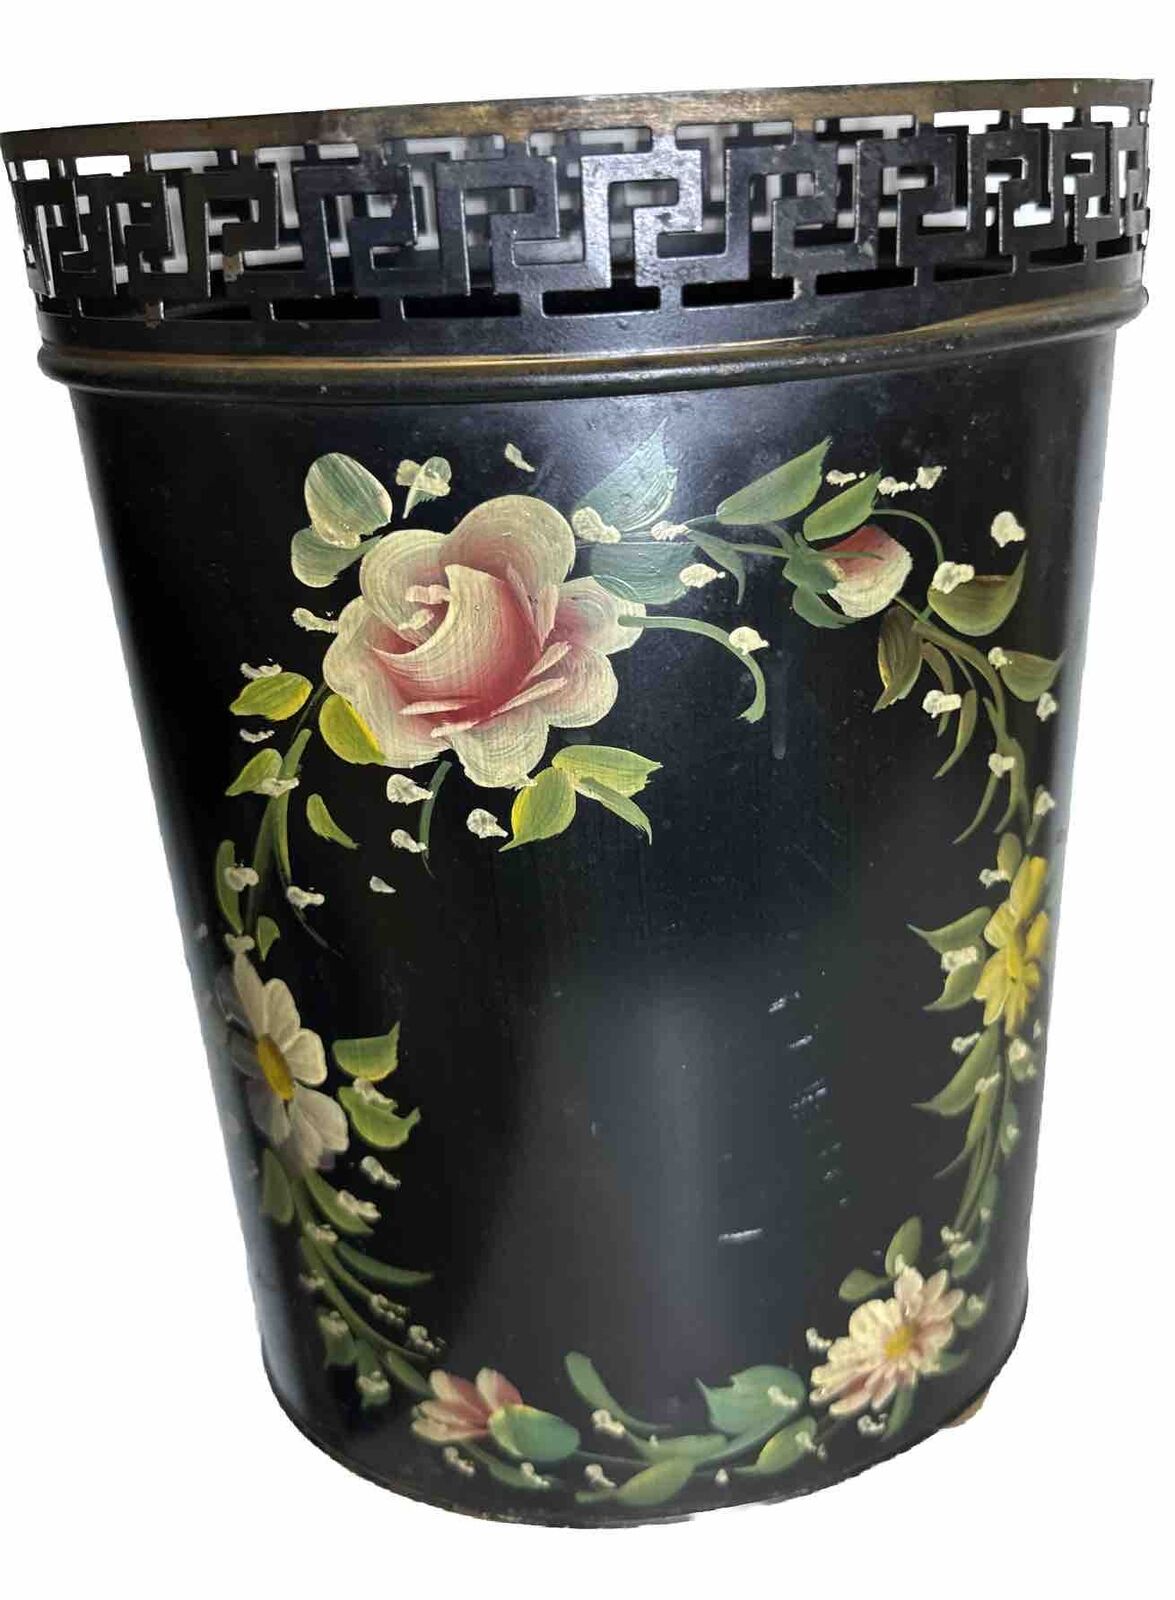 Vintage Plymouth Tole Trash Can Waste Basket Hand Painted Floral on Black Signed